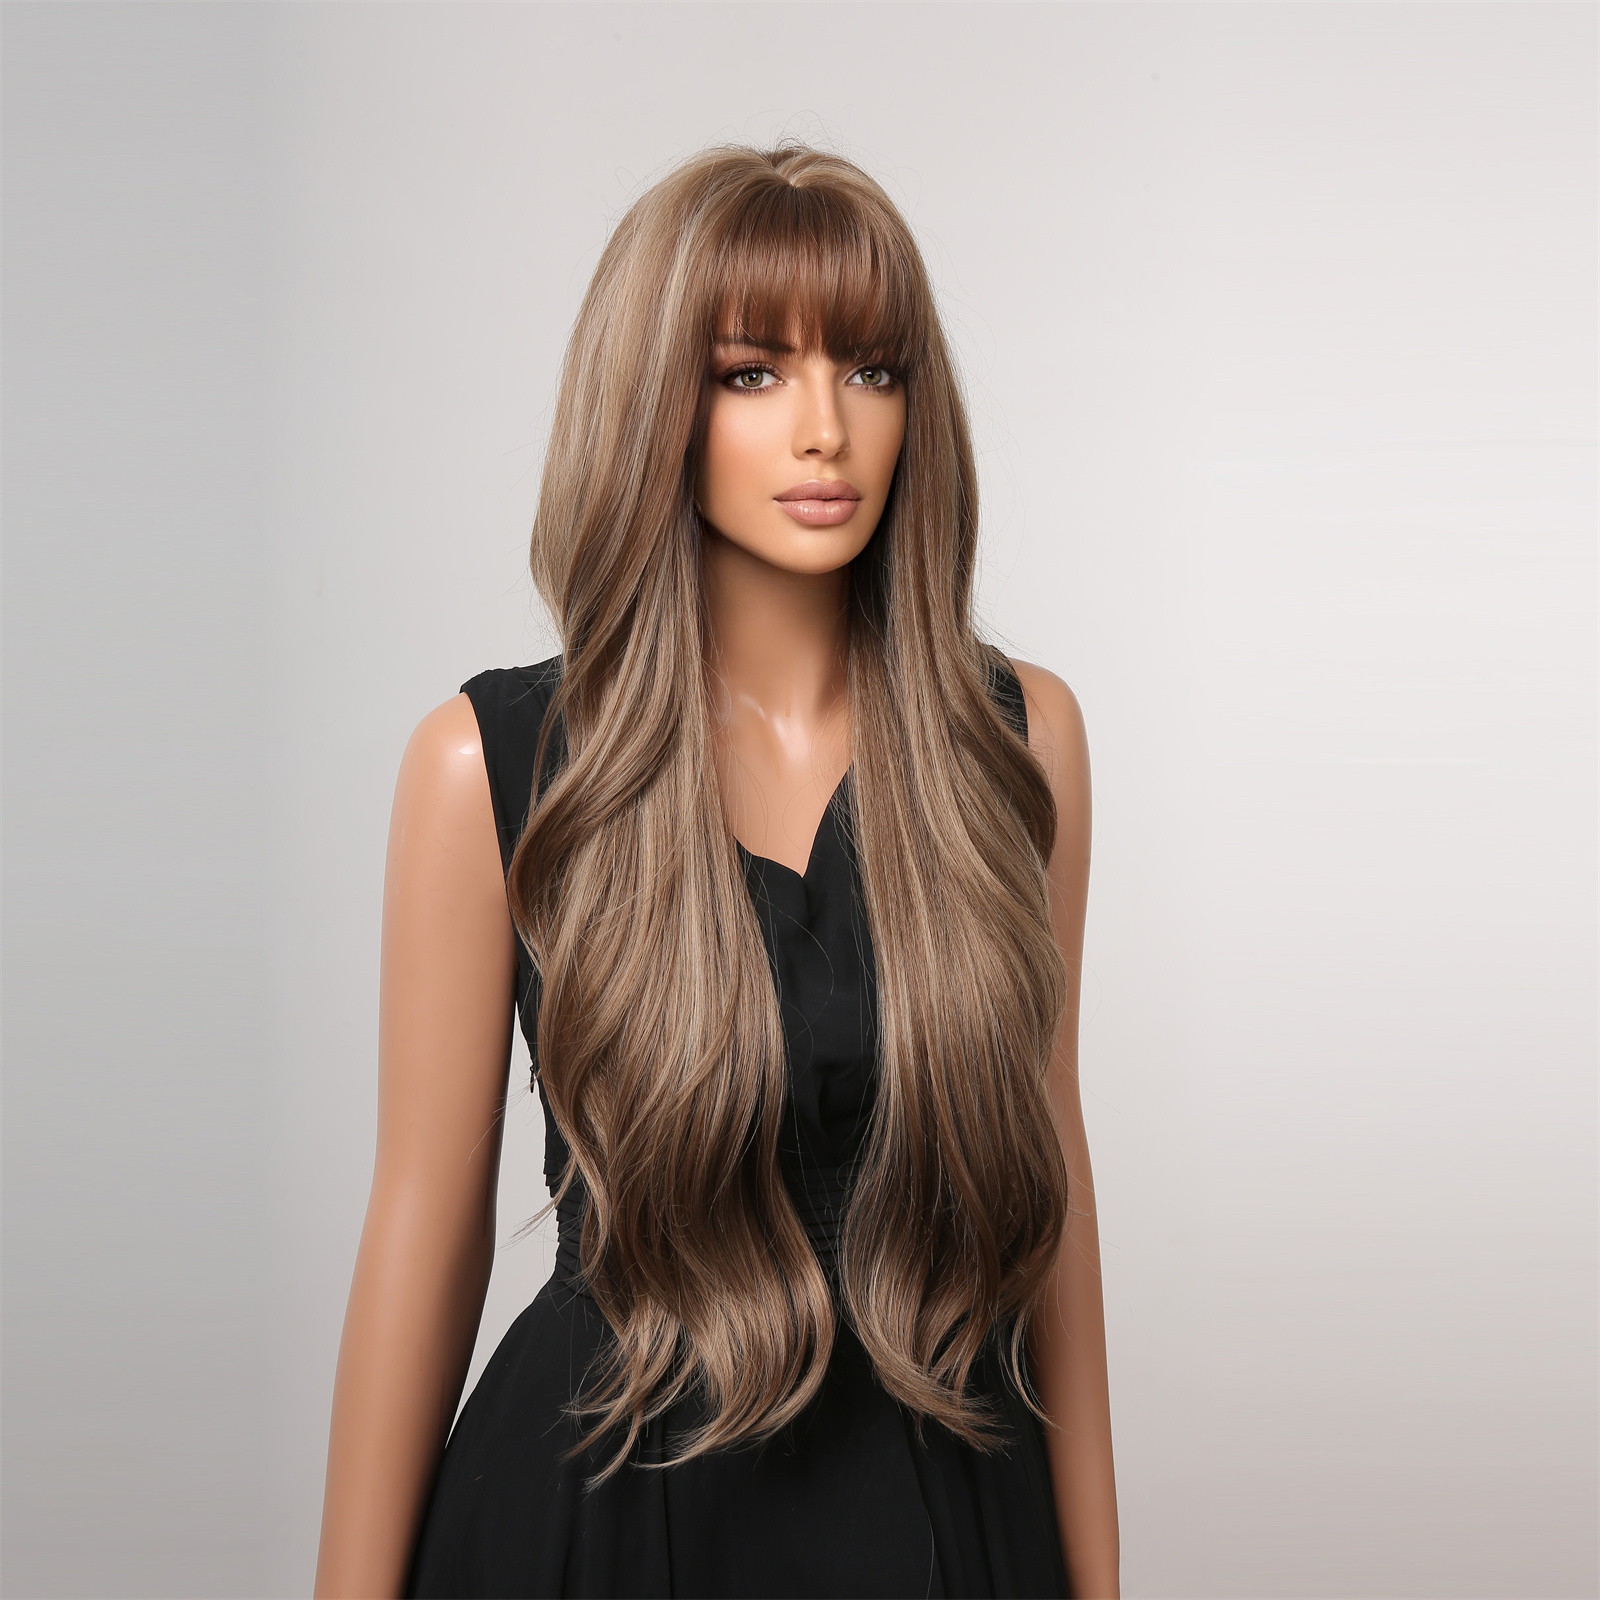 A stylish synthetic wig with dark brown long curly hair and bangs, perfect for a ready-to-go look